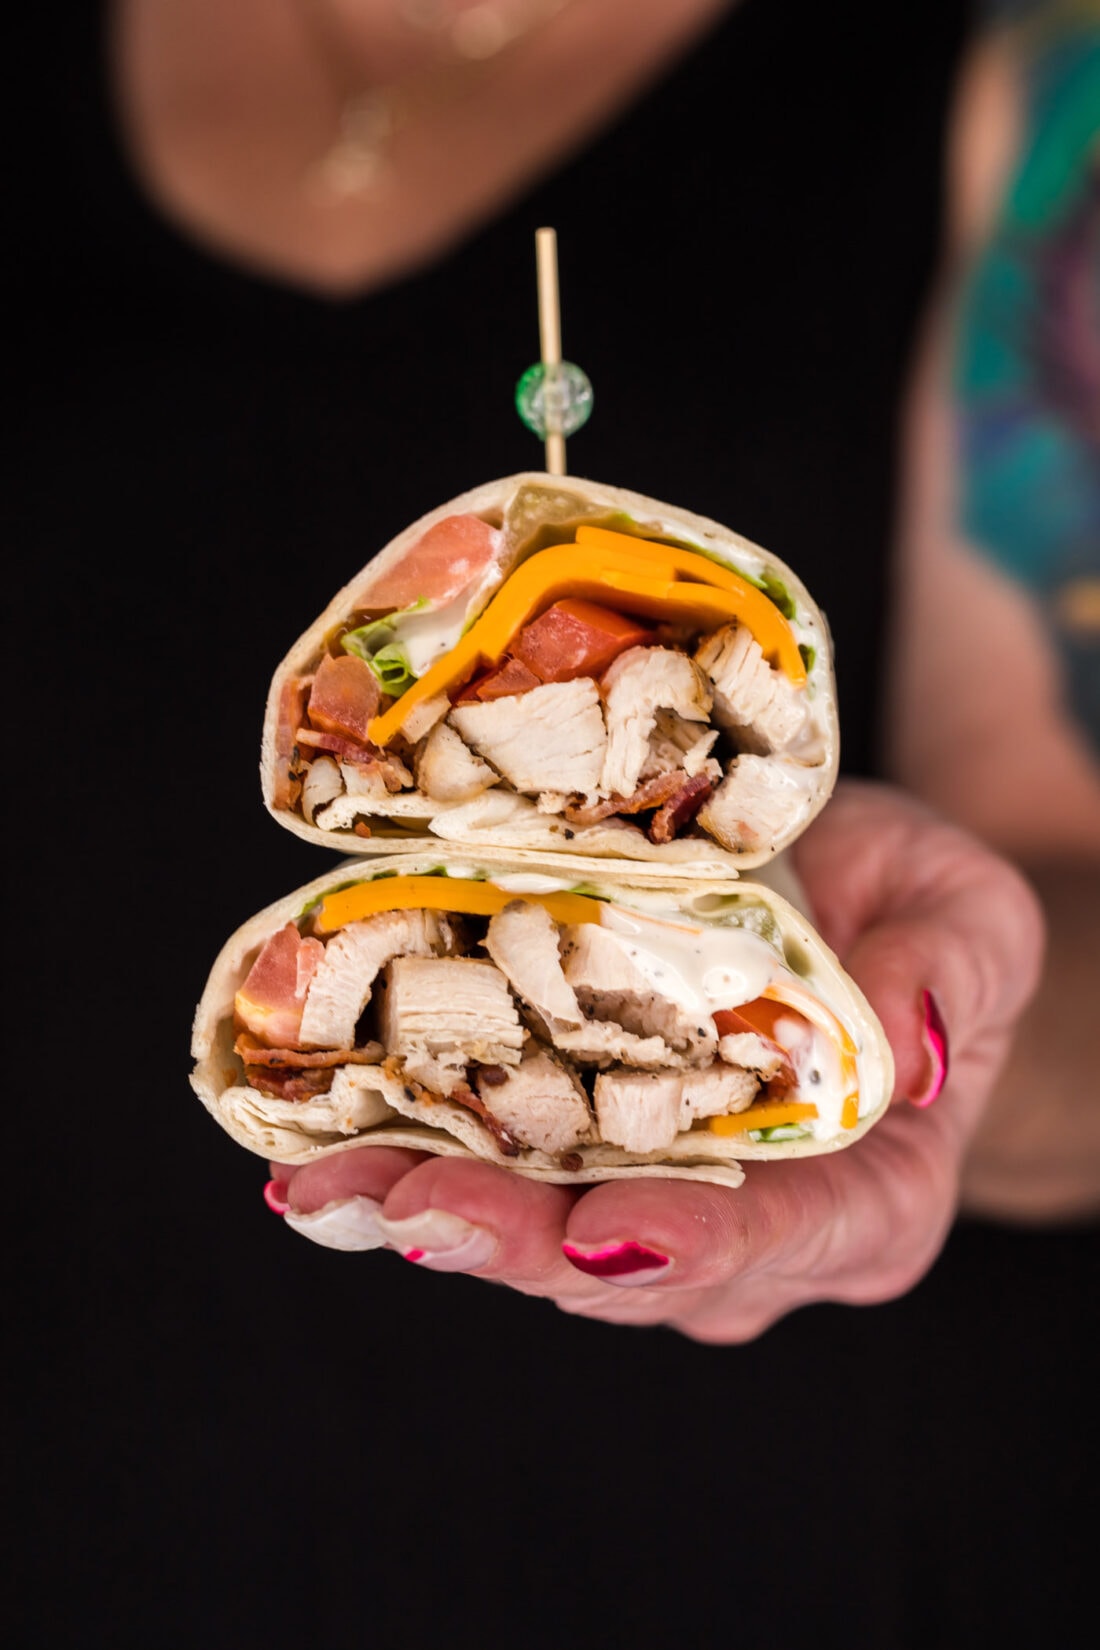 Hand holding two halves of a Chicken Bacon Ranch Wrap stacked on top of each other